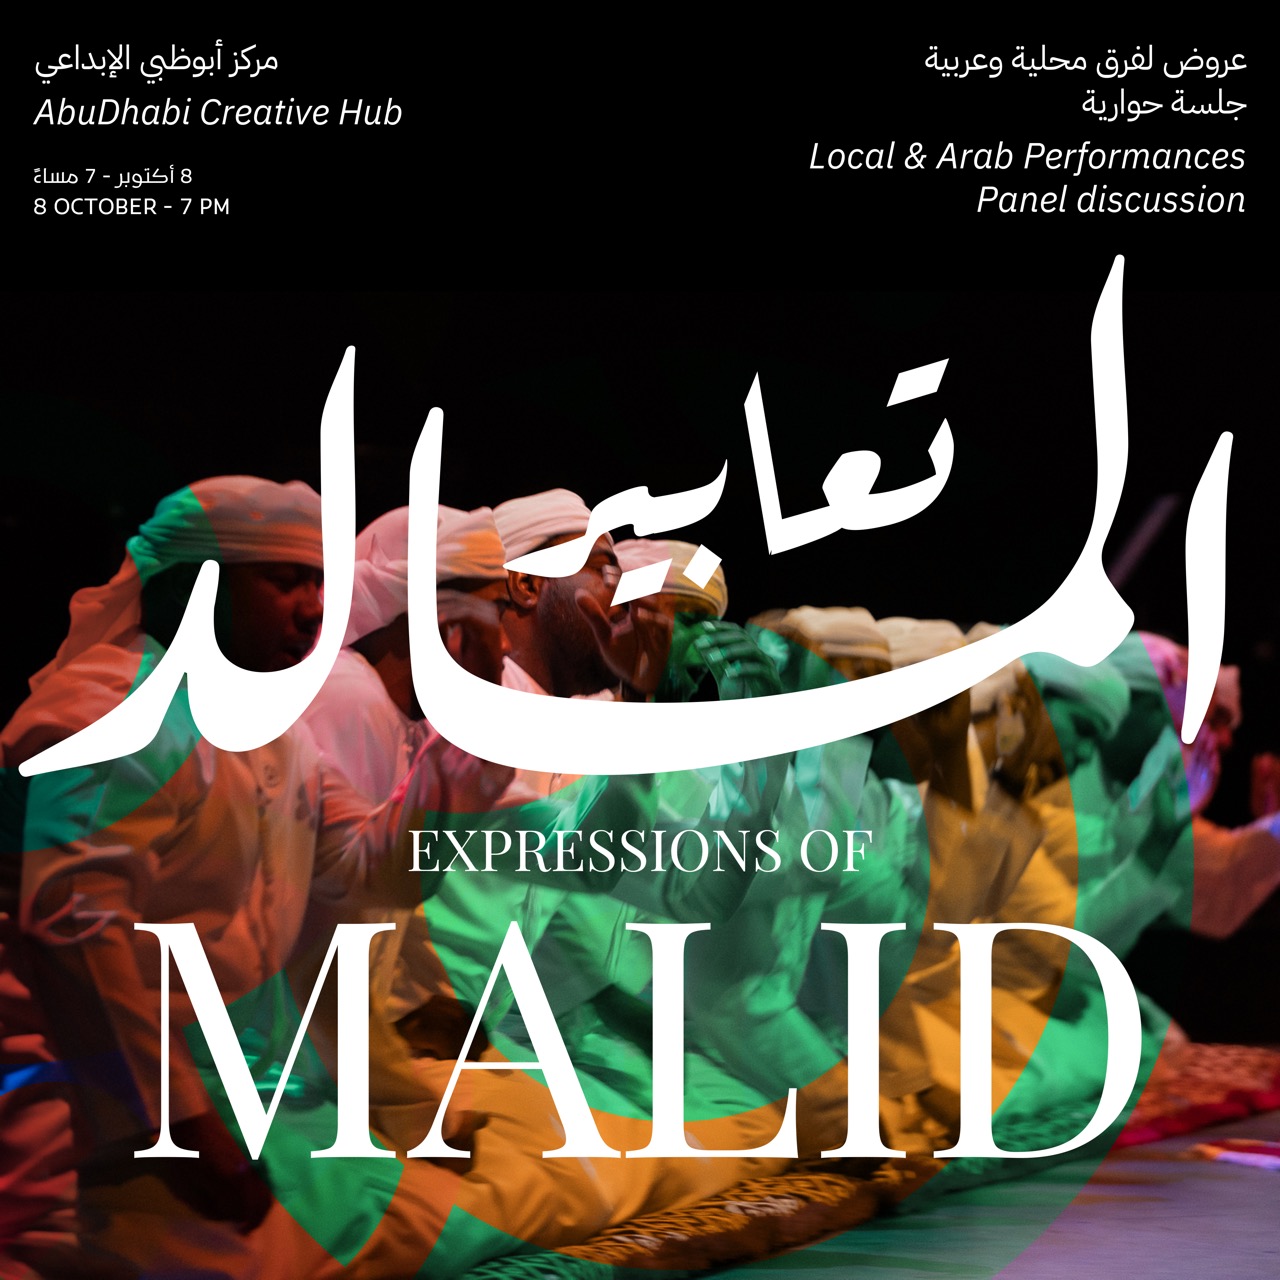  ‘Expressions of Malid’ to celebrate Prophet Mohammed’s birth anniversary